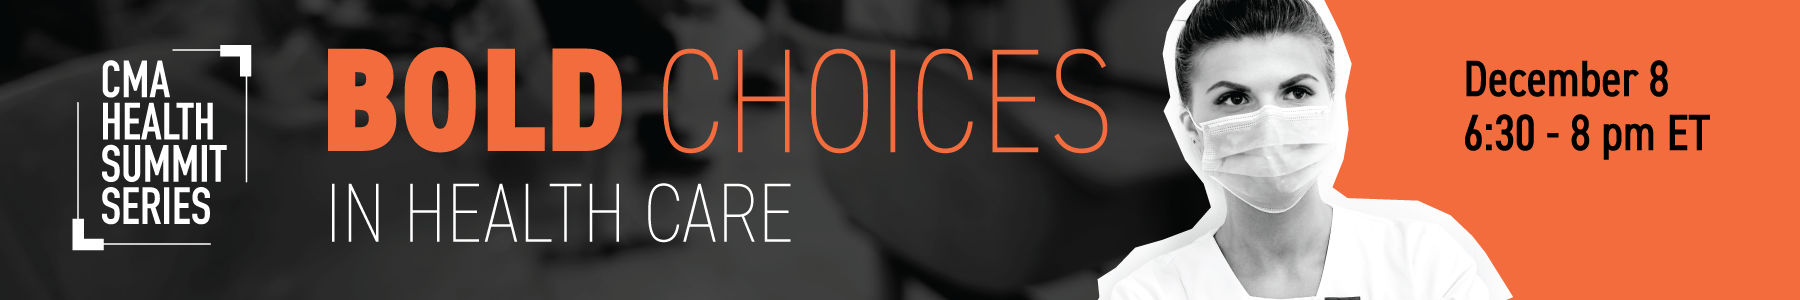 bold choices in health care december 8 6:30 to 8pm ET